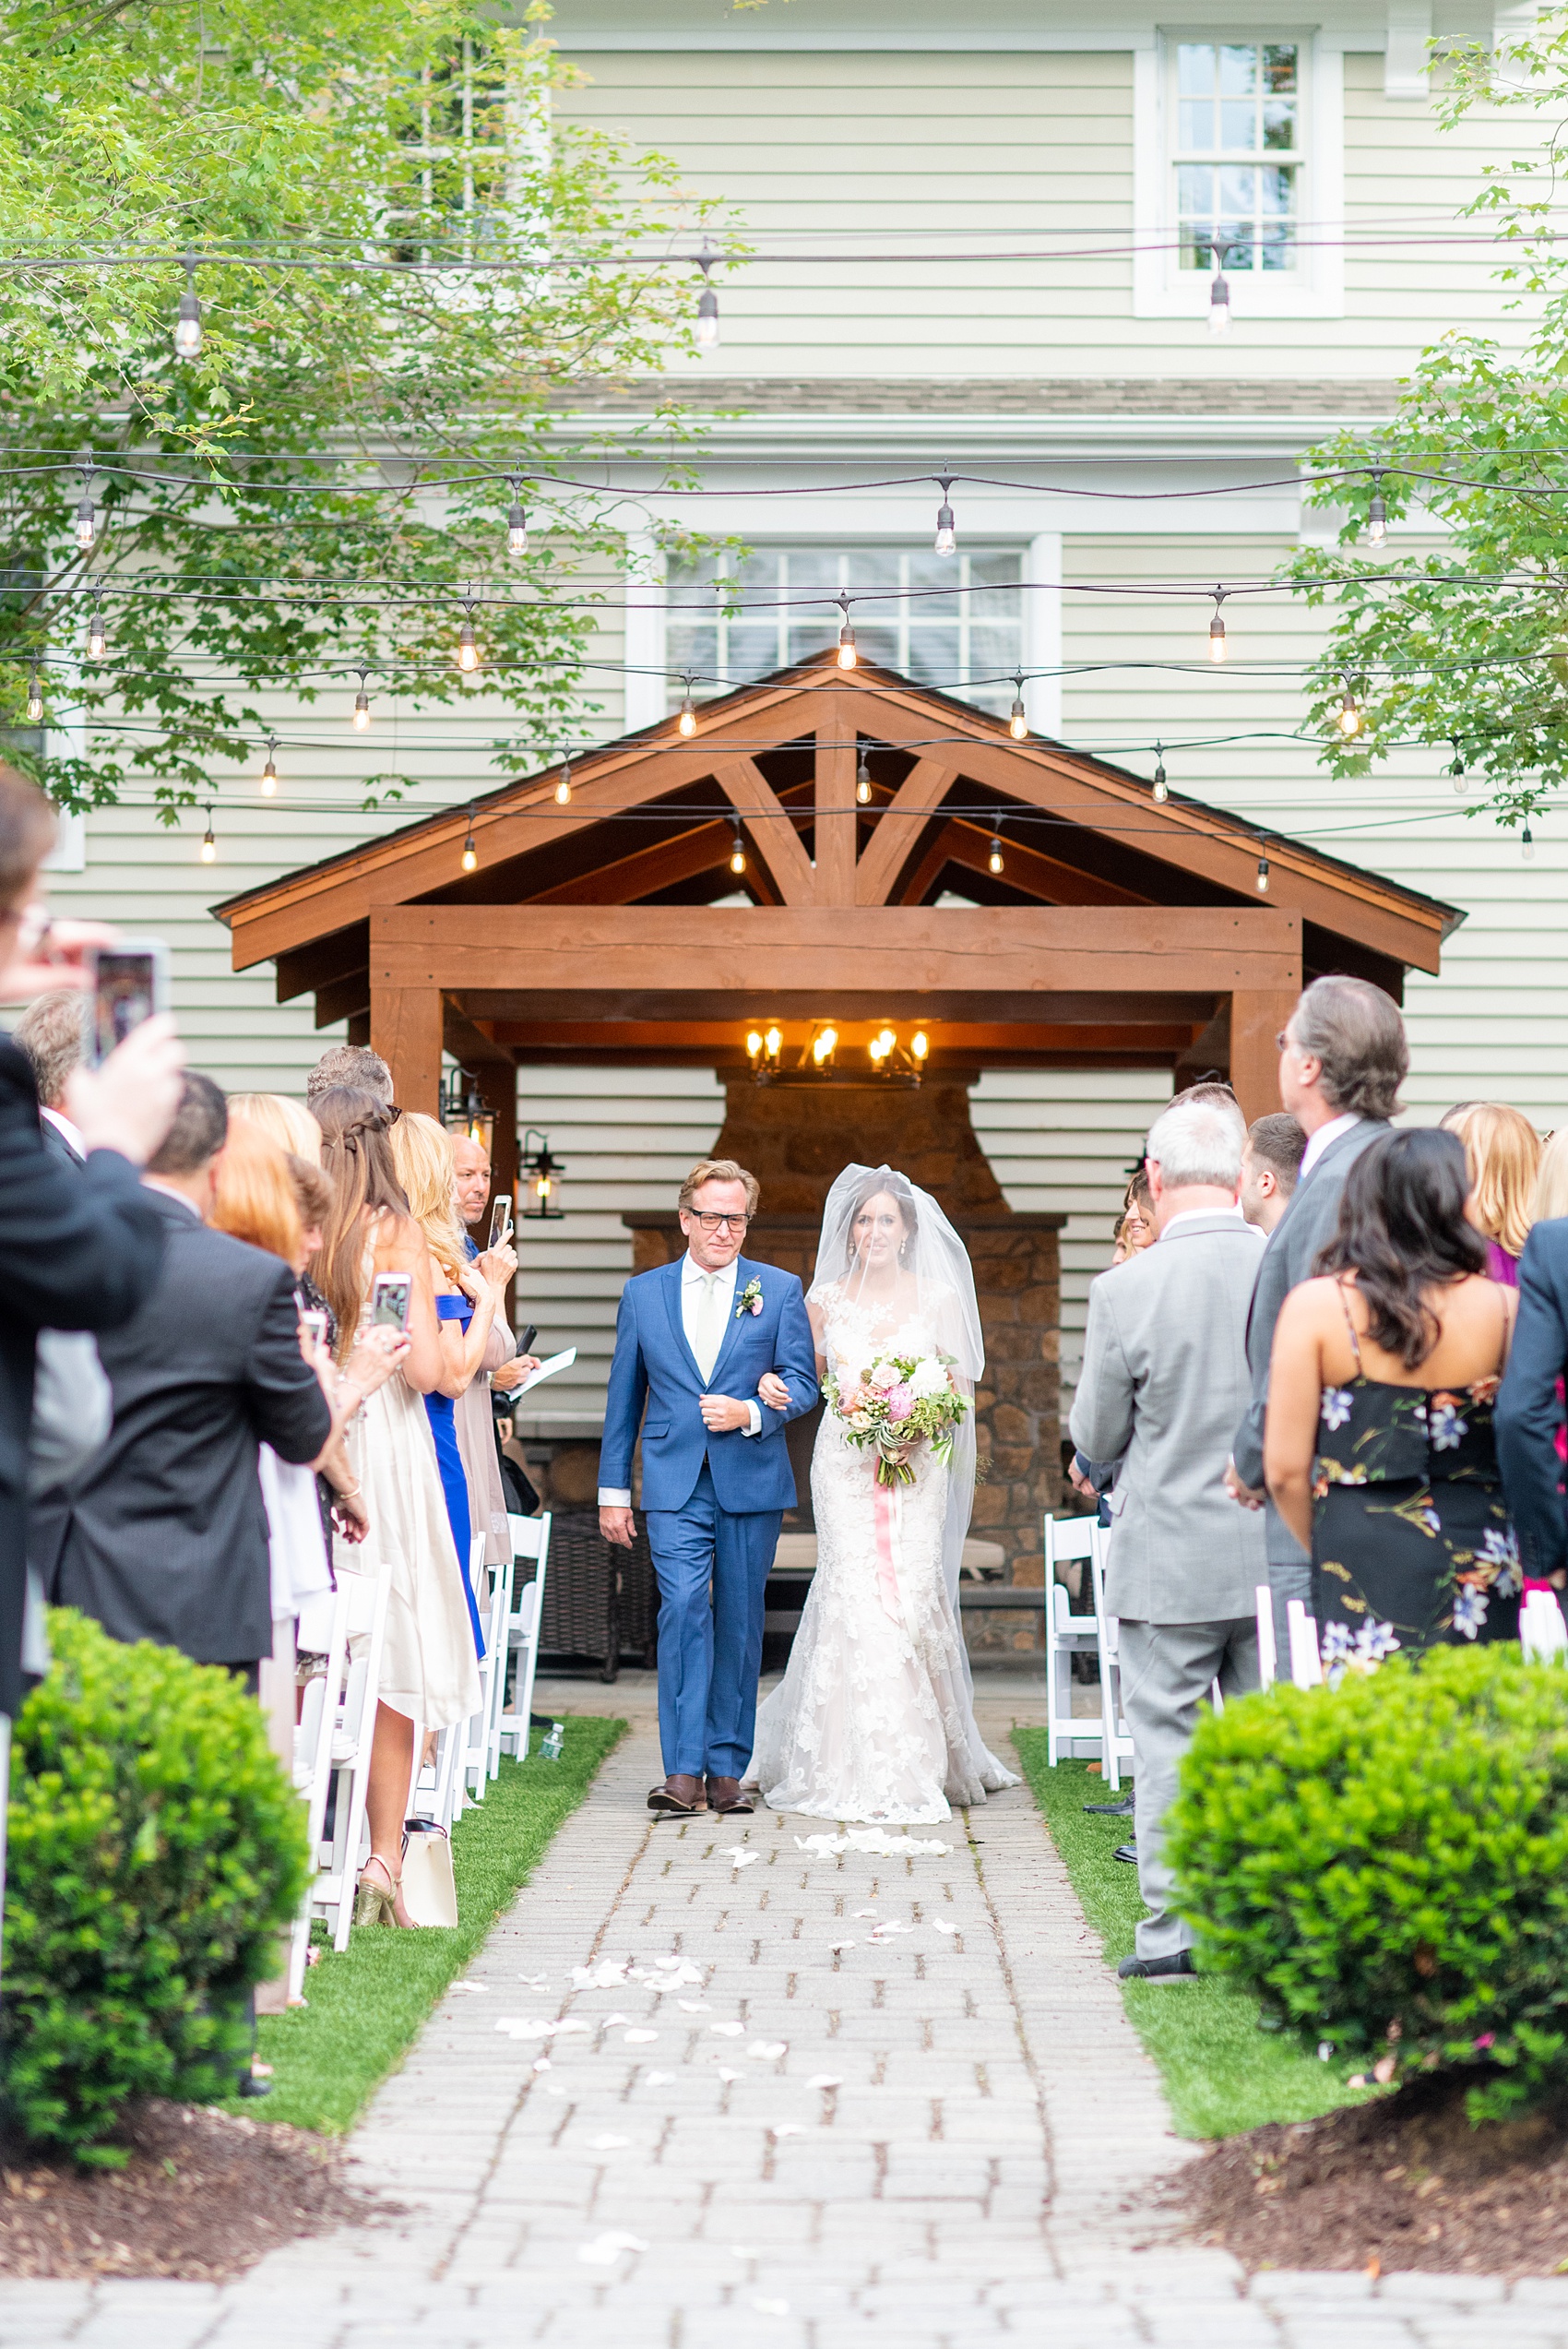 A summer wedding at Olde Mill Inn, NJ. Photos by Mikkel Paige Photography for an event with light pink and blue details. This New Jersey venue is a great option for something not too far from NYC. The couple had their ceremony in the interior courtyard. Click through for their complete wedding recap! #OldeMillInn #NJwedding #NJweddingphotographer #mikkelpaige #NewJerseyWeddingVenue #NewJerseyWedding #CrossEstateGardens 